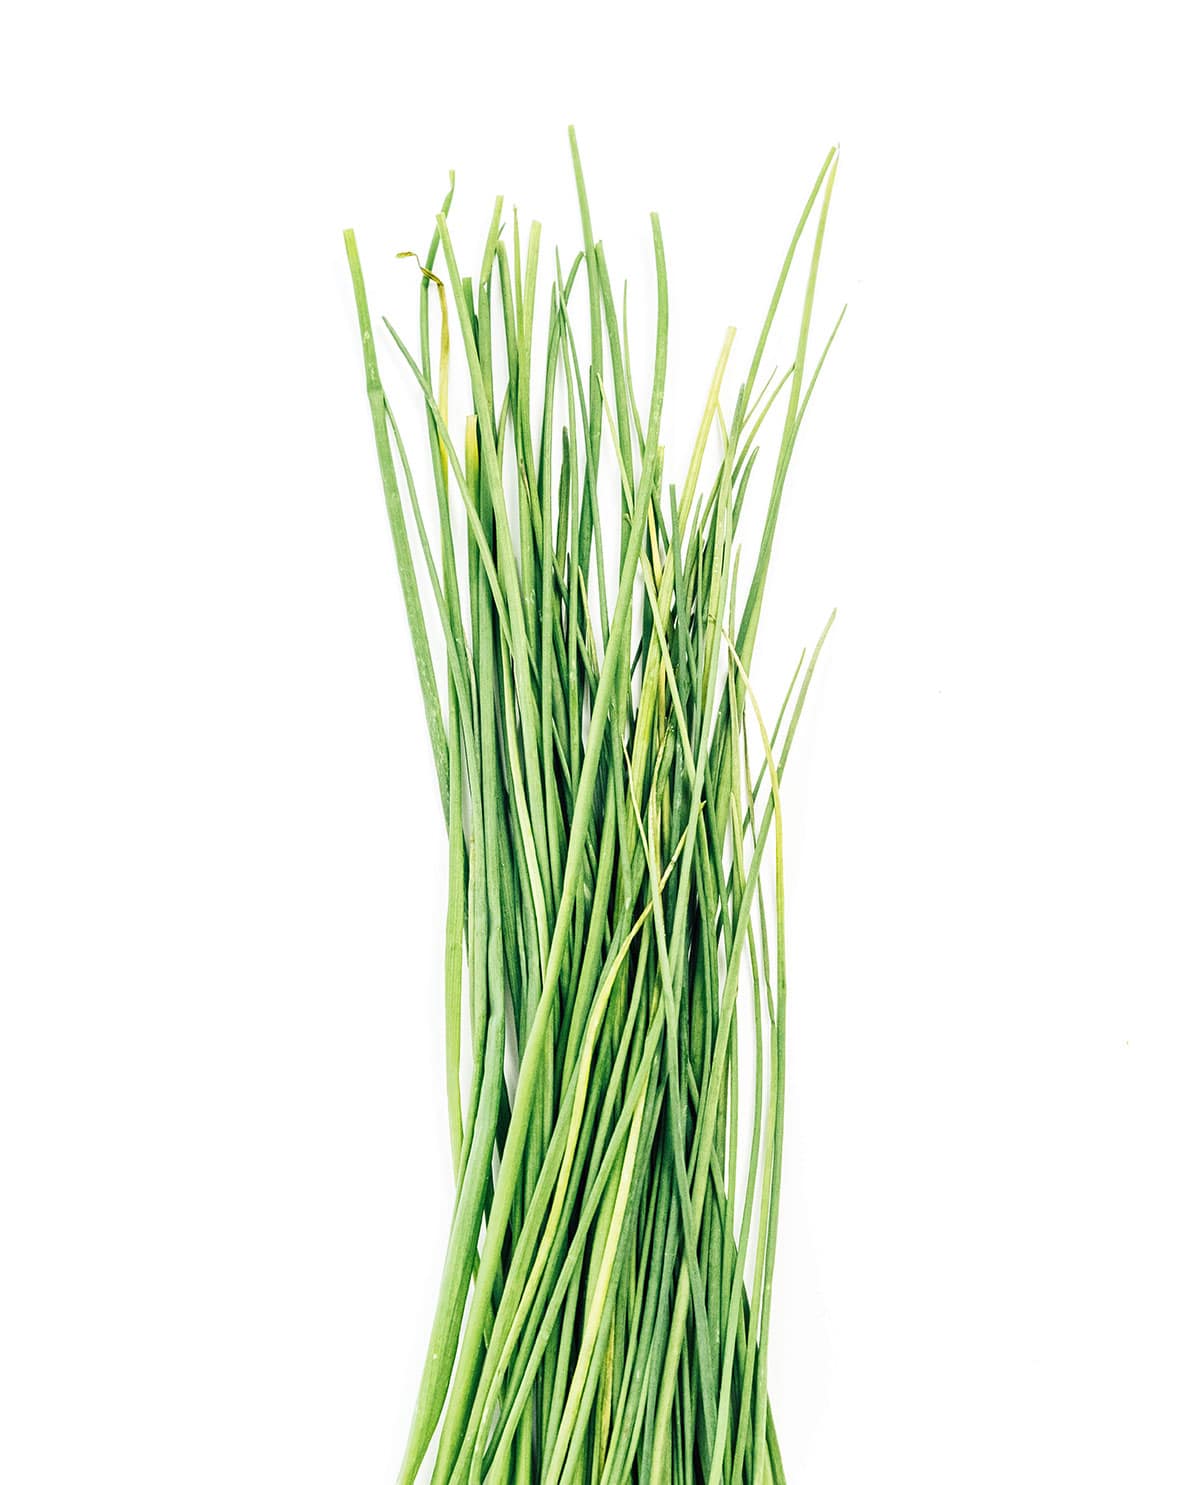 A bunch of chives on a white background